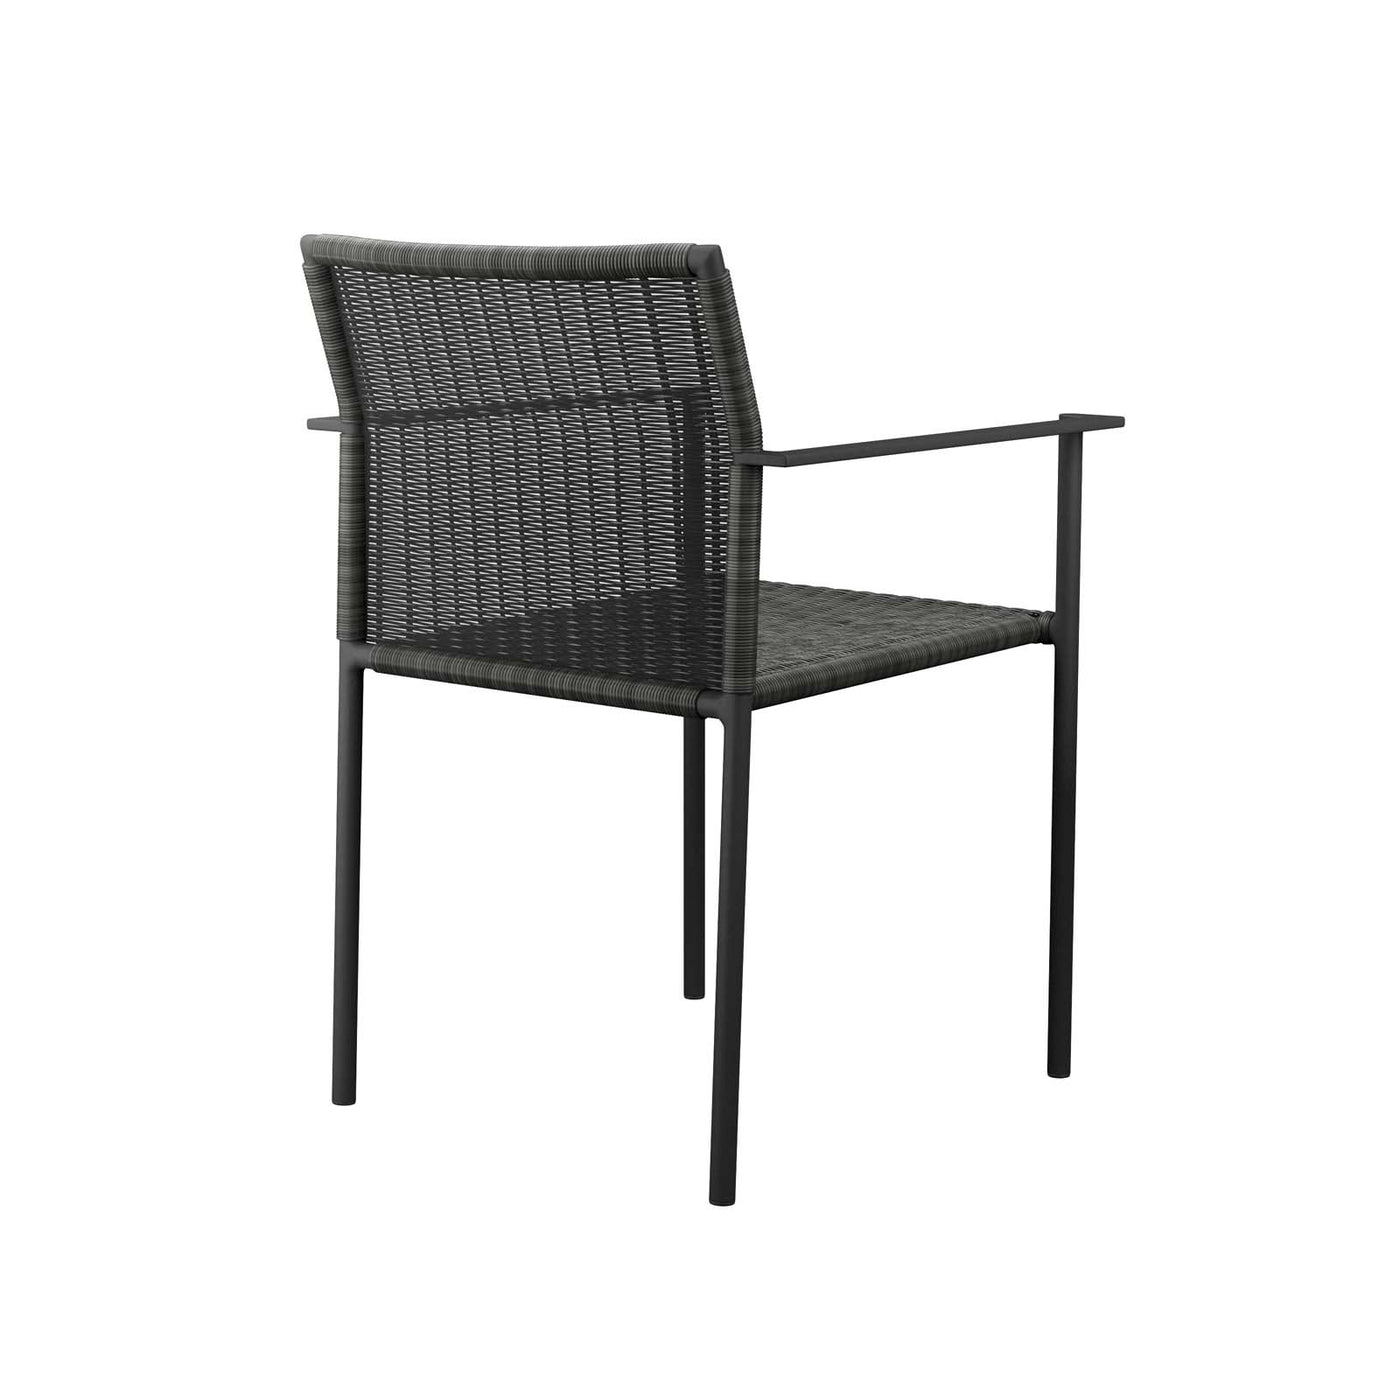 Lagoon Outdoor Patio Dining Armchairs Set of 2